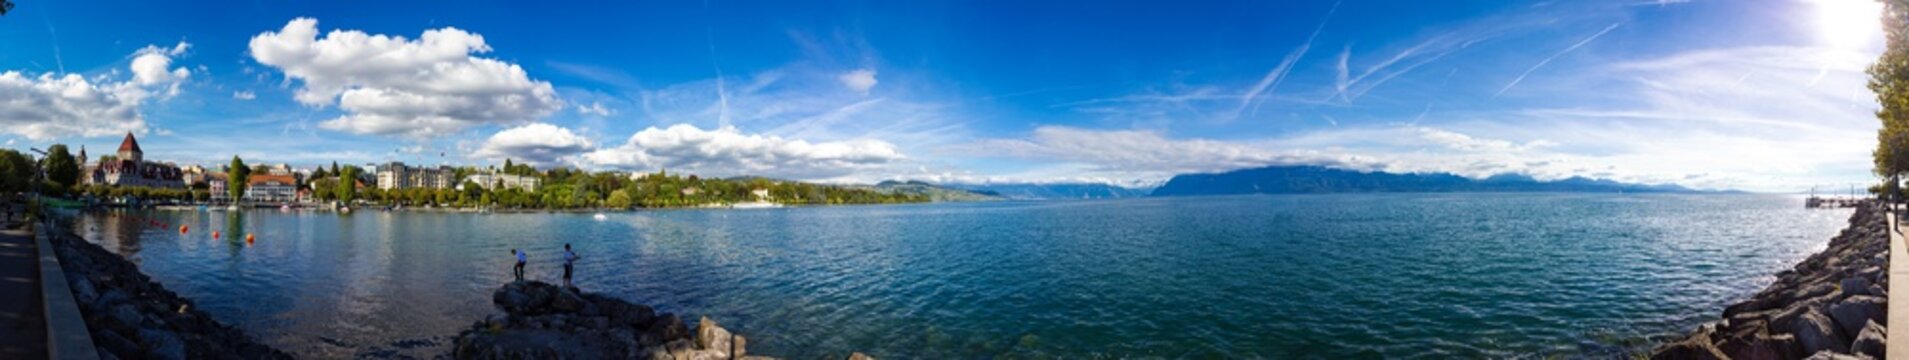 Panorama Genfer See Lausanne 